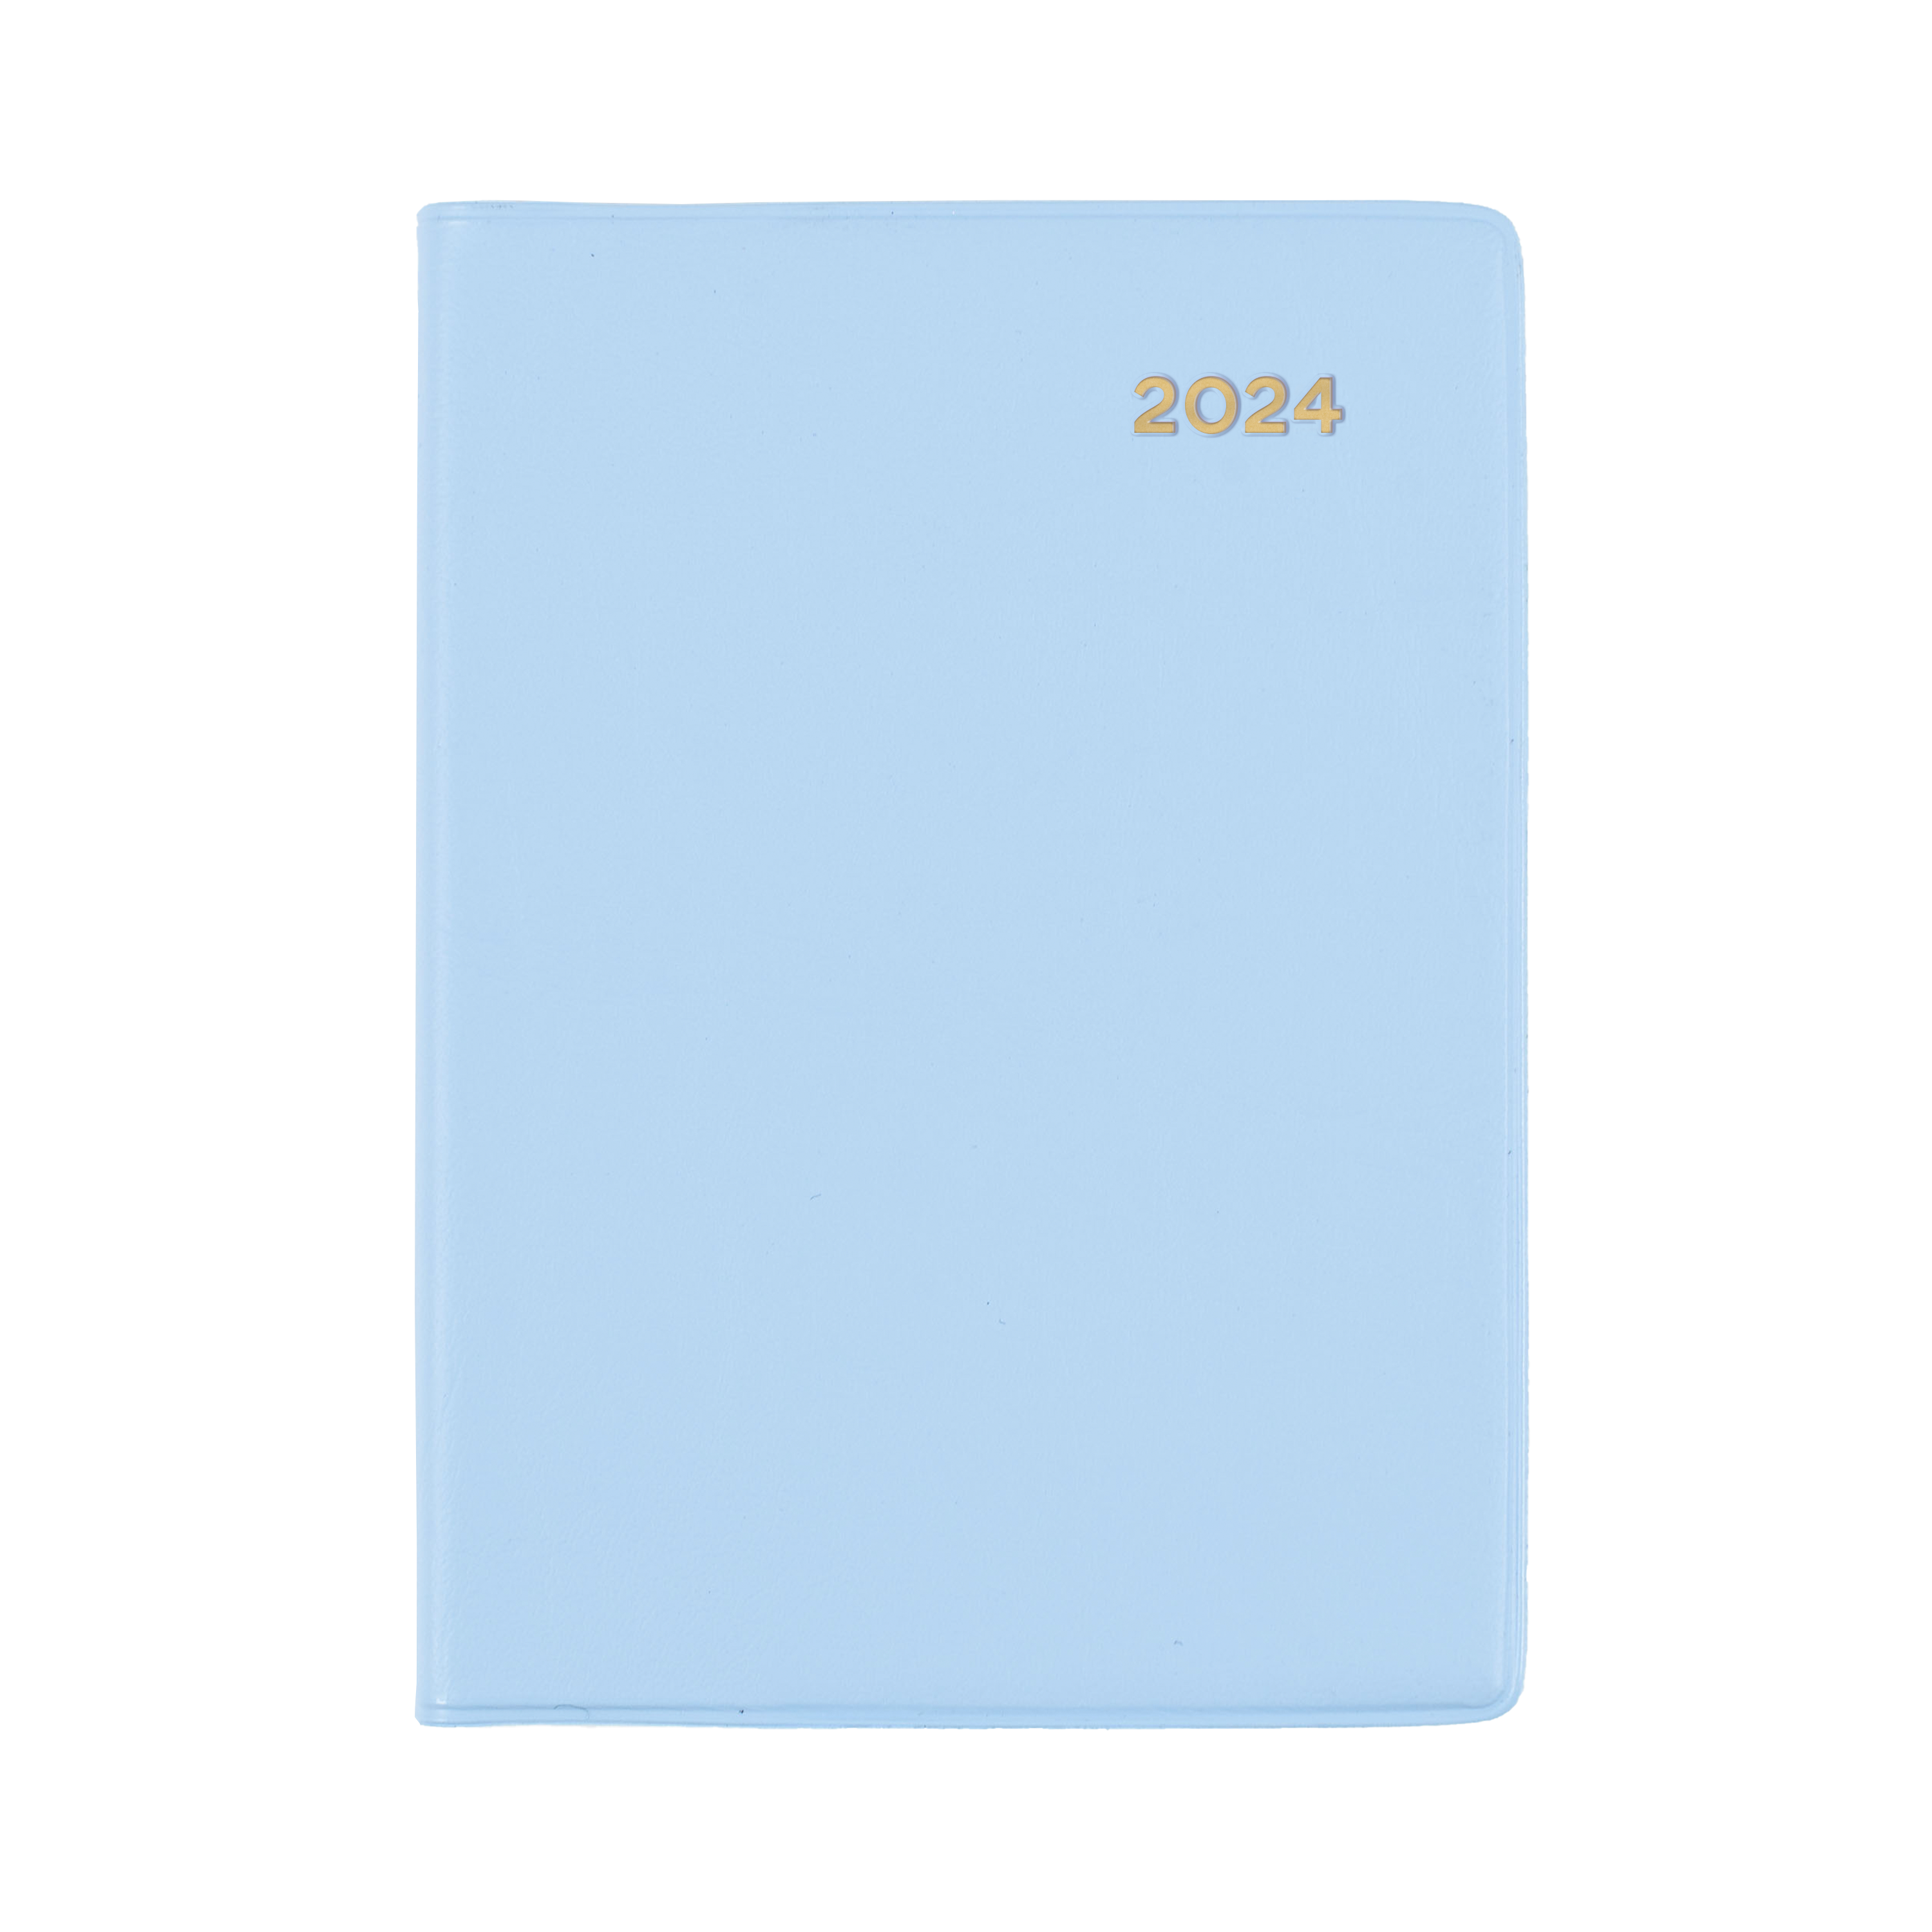 Belmont Colours 2024 Diary - Pocket Week to View, Size A7 Teal / A7 (105 x 74mm)